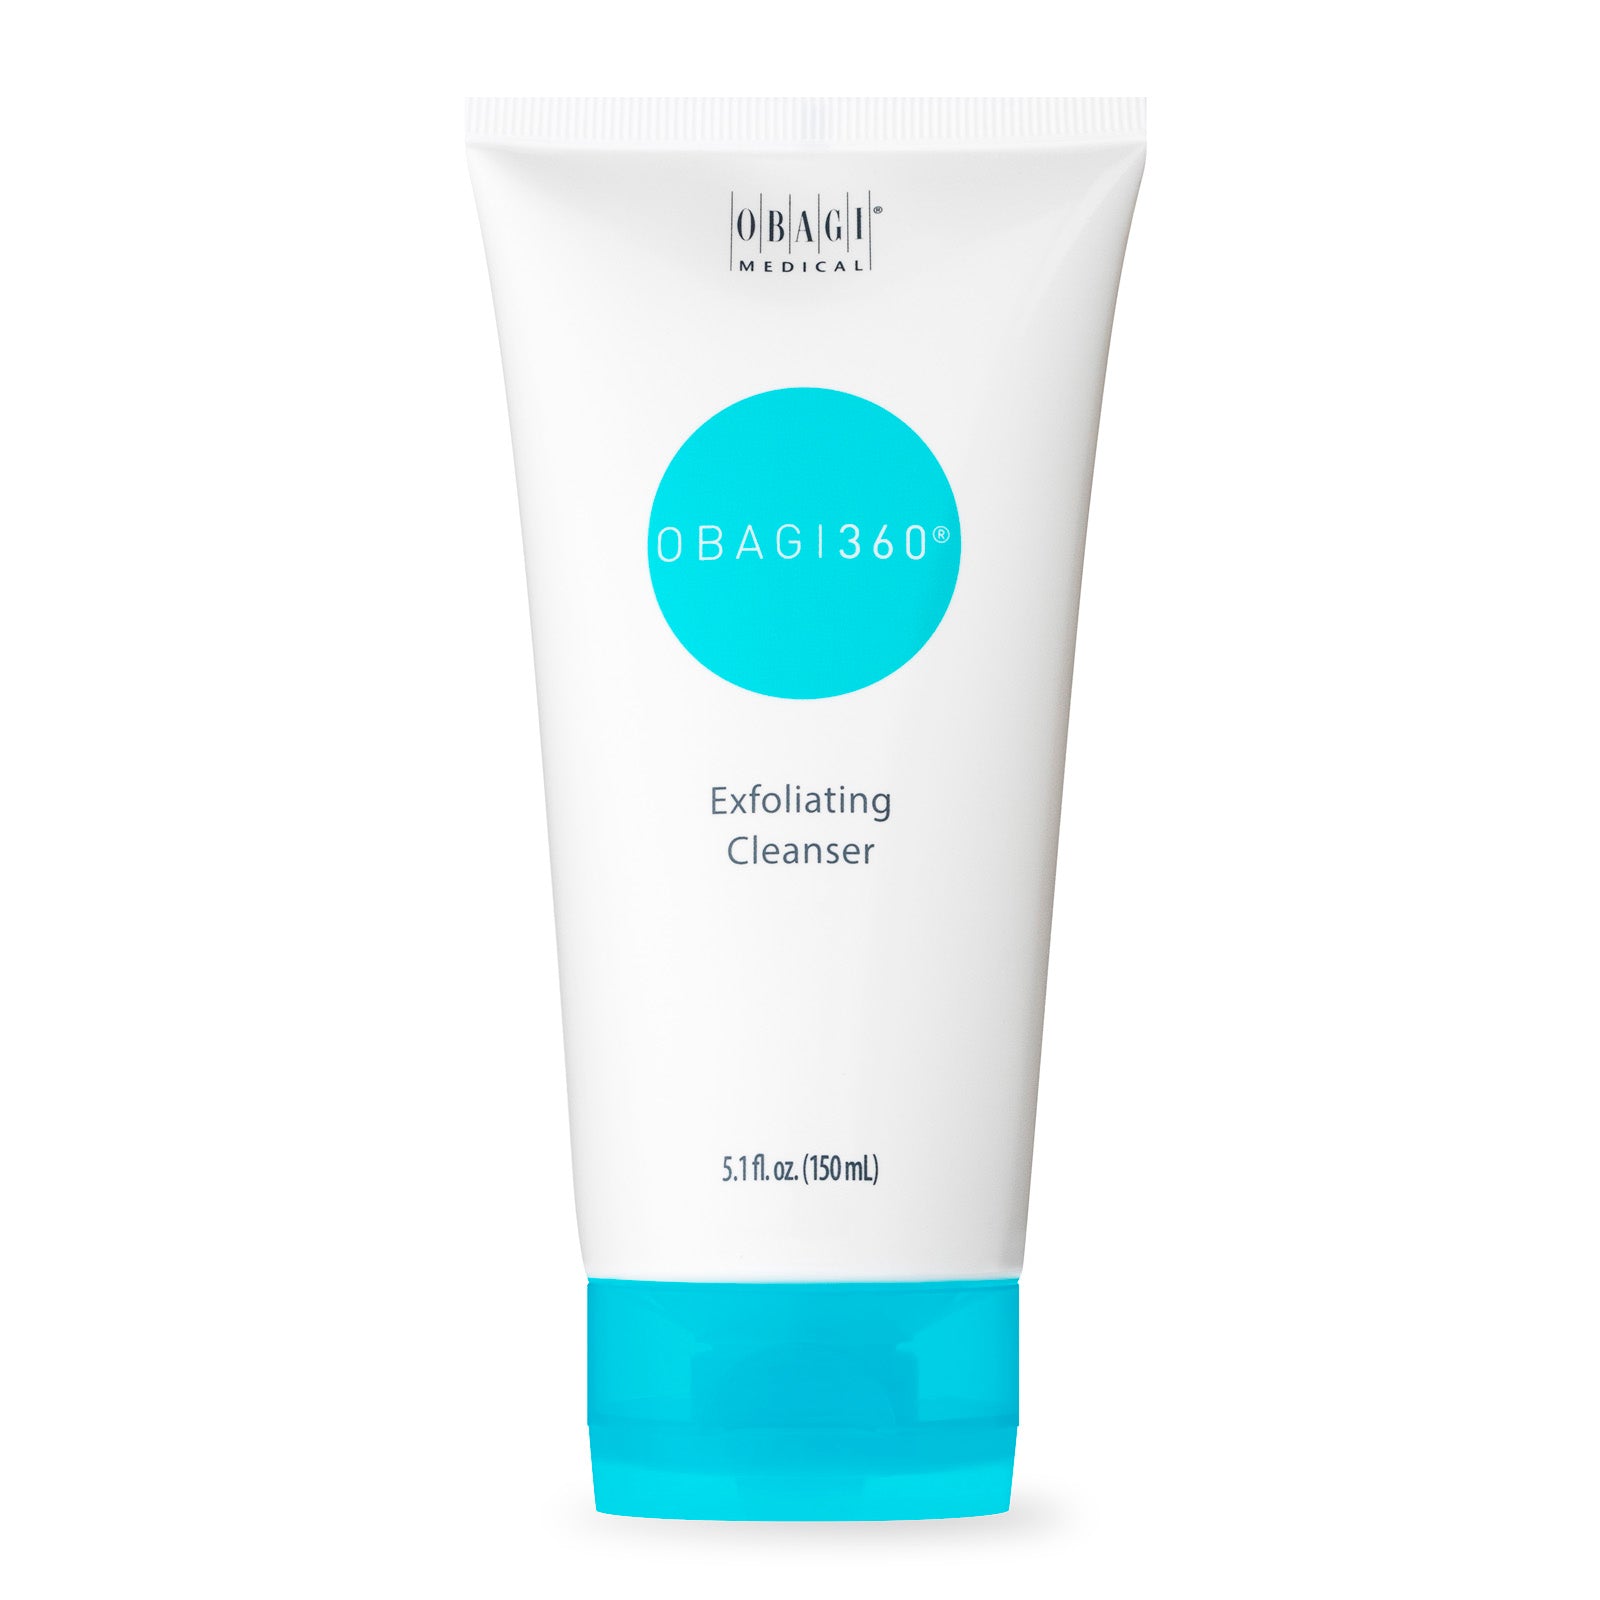 Obagi360 Exfoliating Cleanser 5.1 fl oz, Exfoliating cleanser - Beauty By Vianna